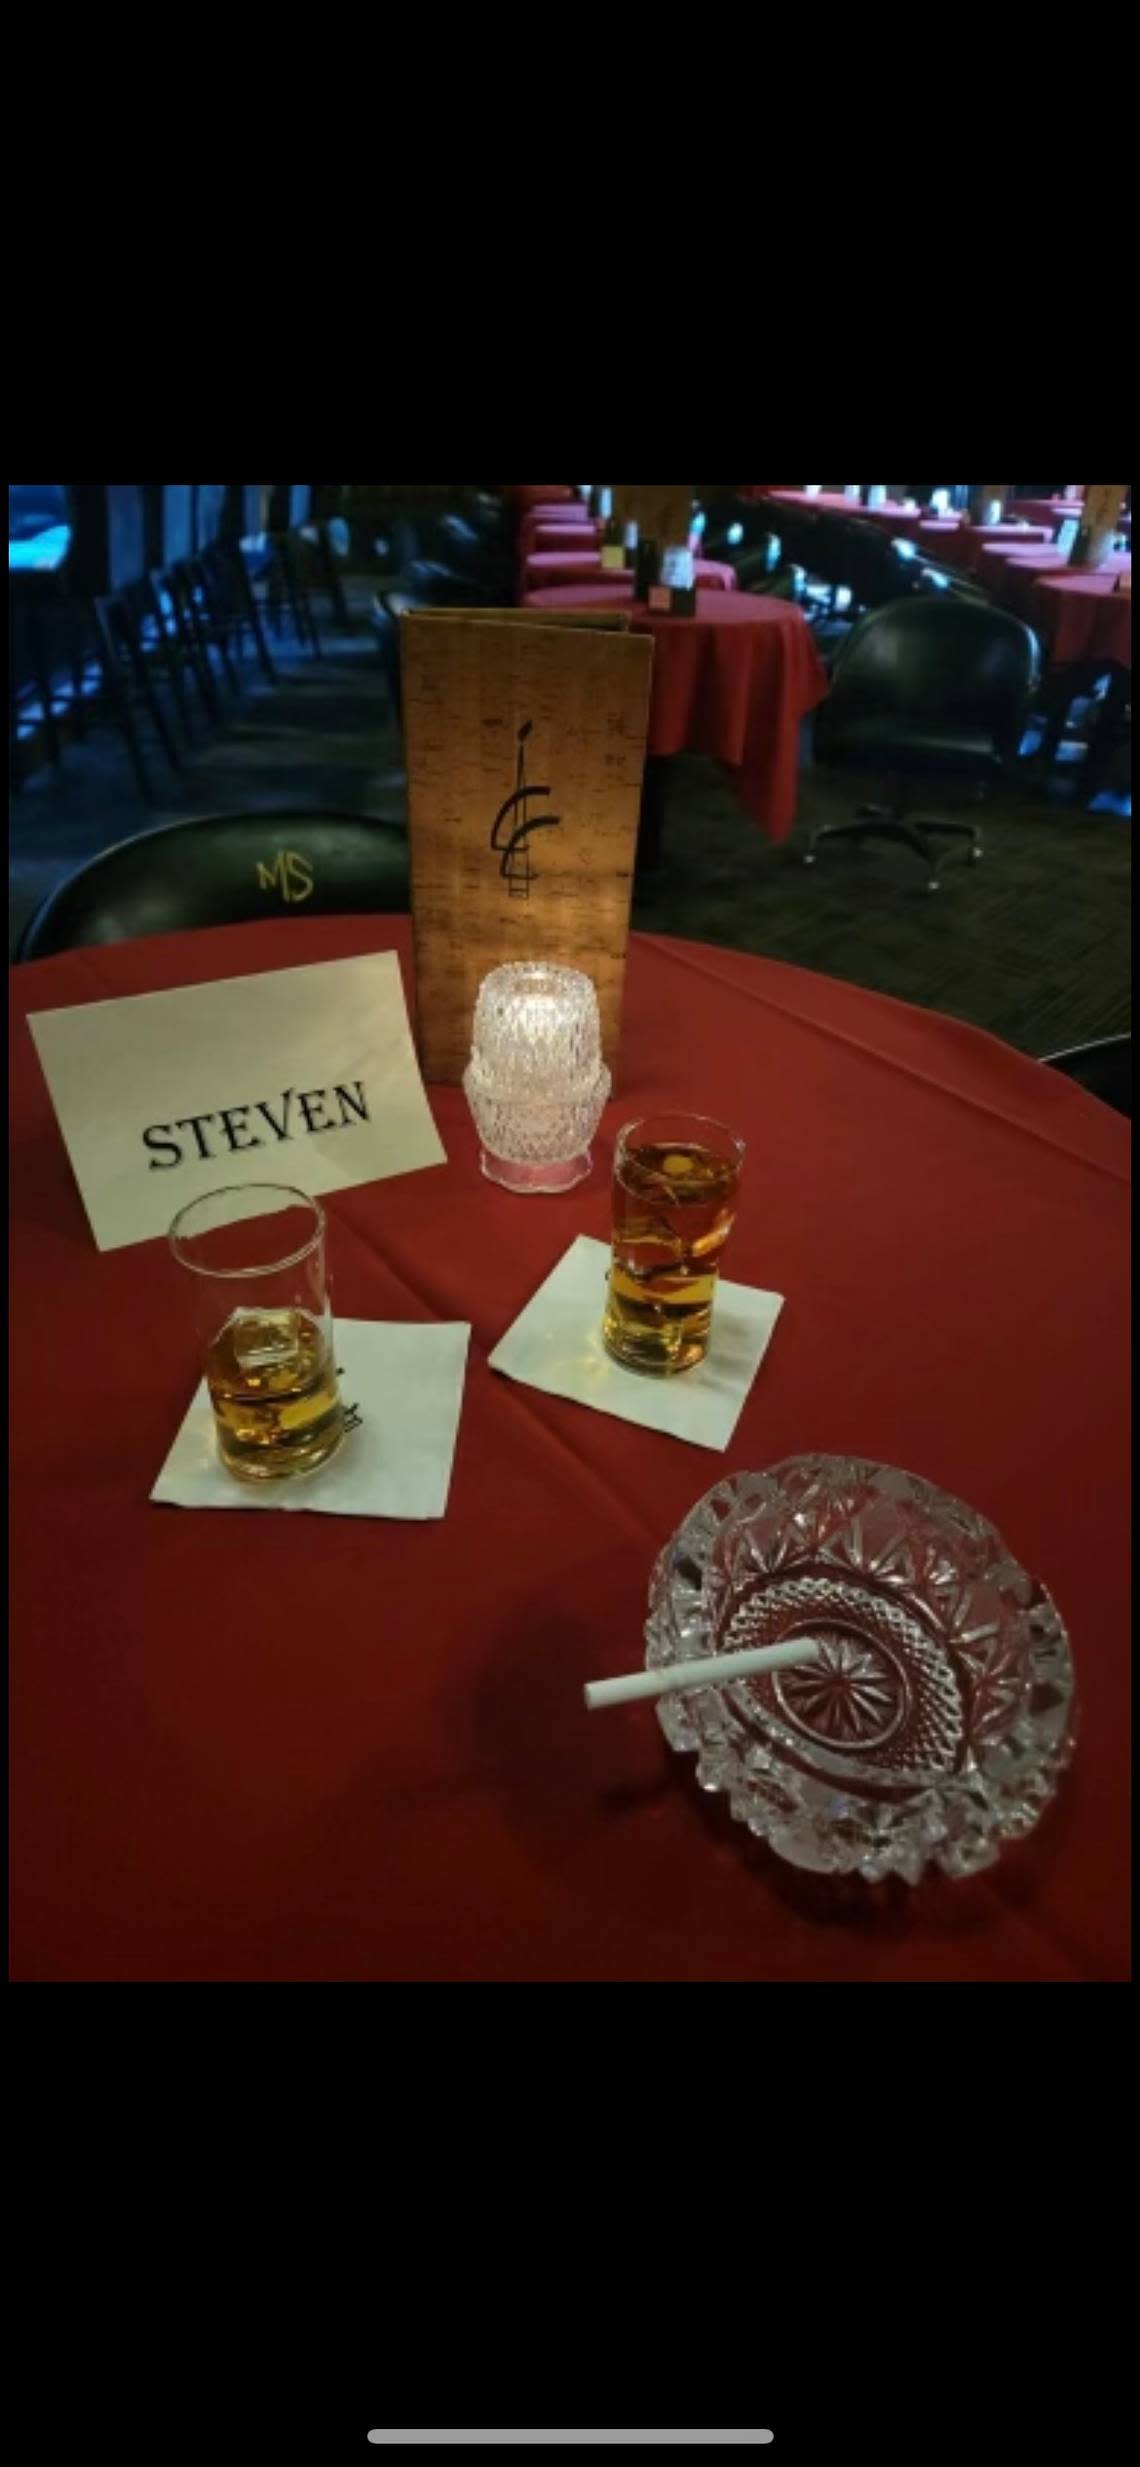 In honor of the late Mike Steven, the Candle Club last week didn’t seat anyone at his table, which had a sign with his name on it, an unlit cigarette in an ashtray and his favorite Ten High bourbon with a splash of water.